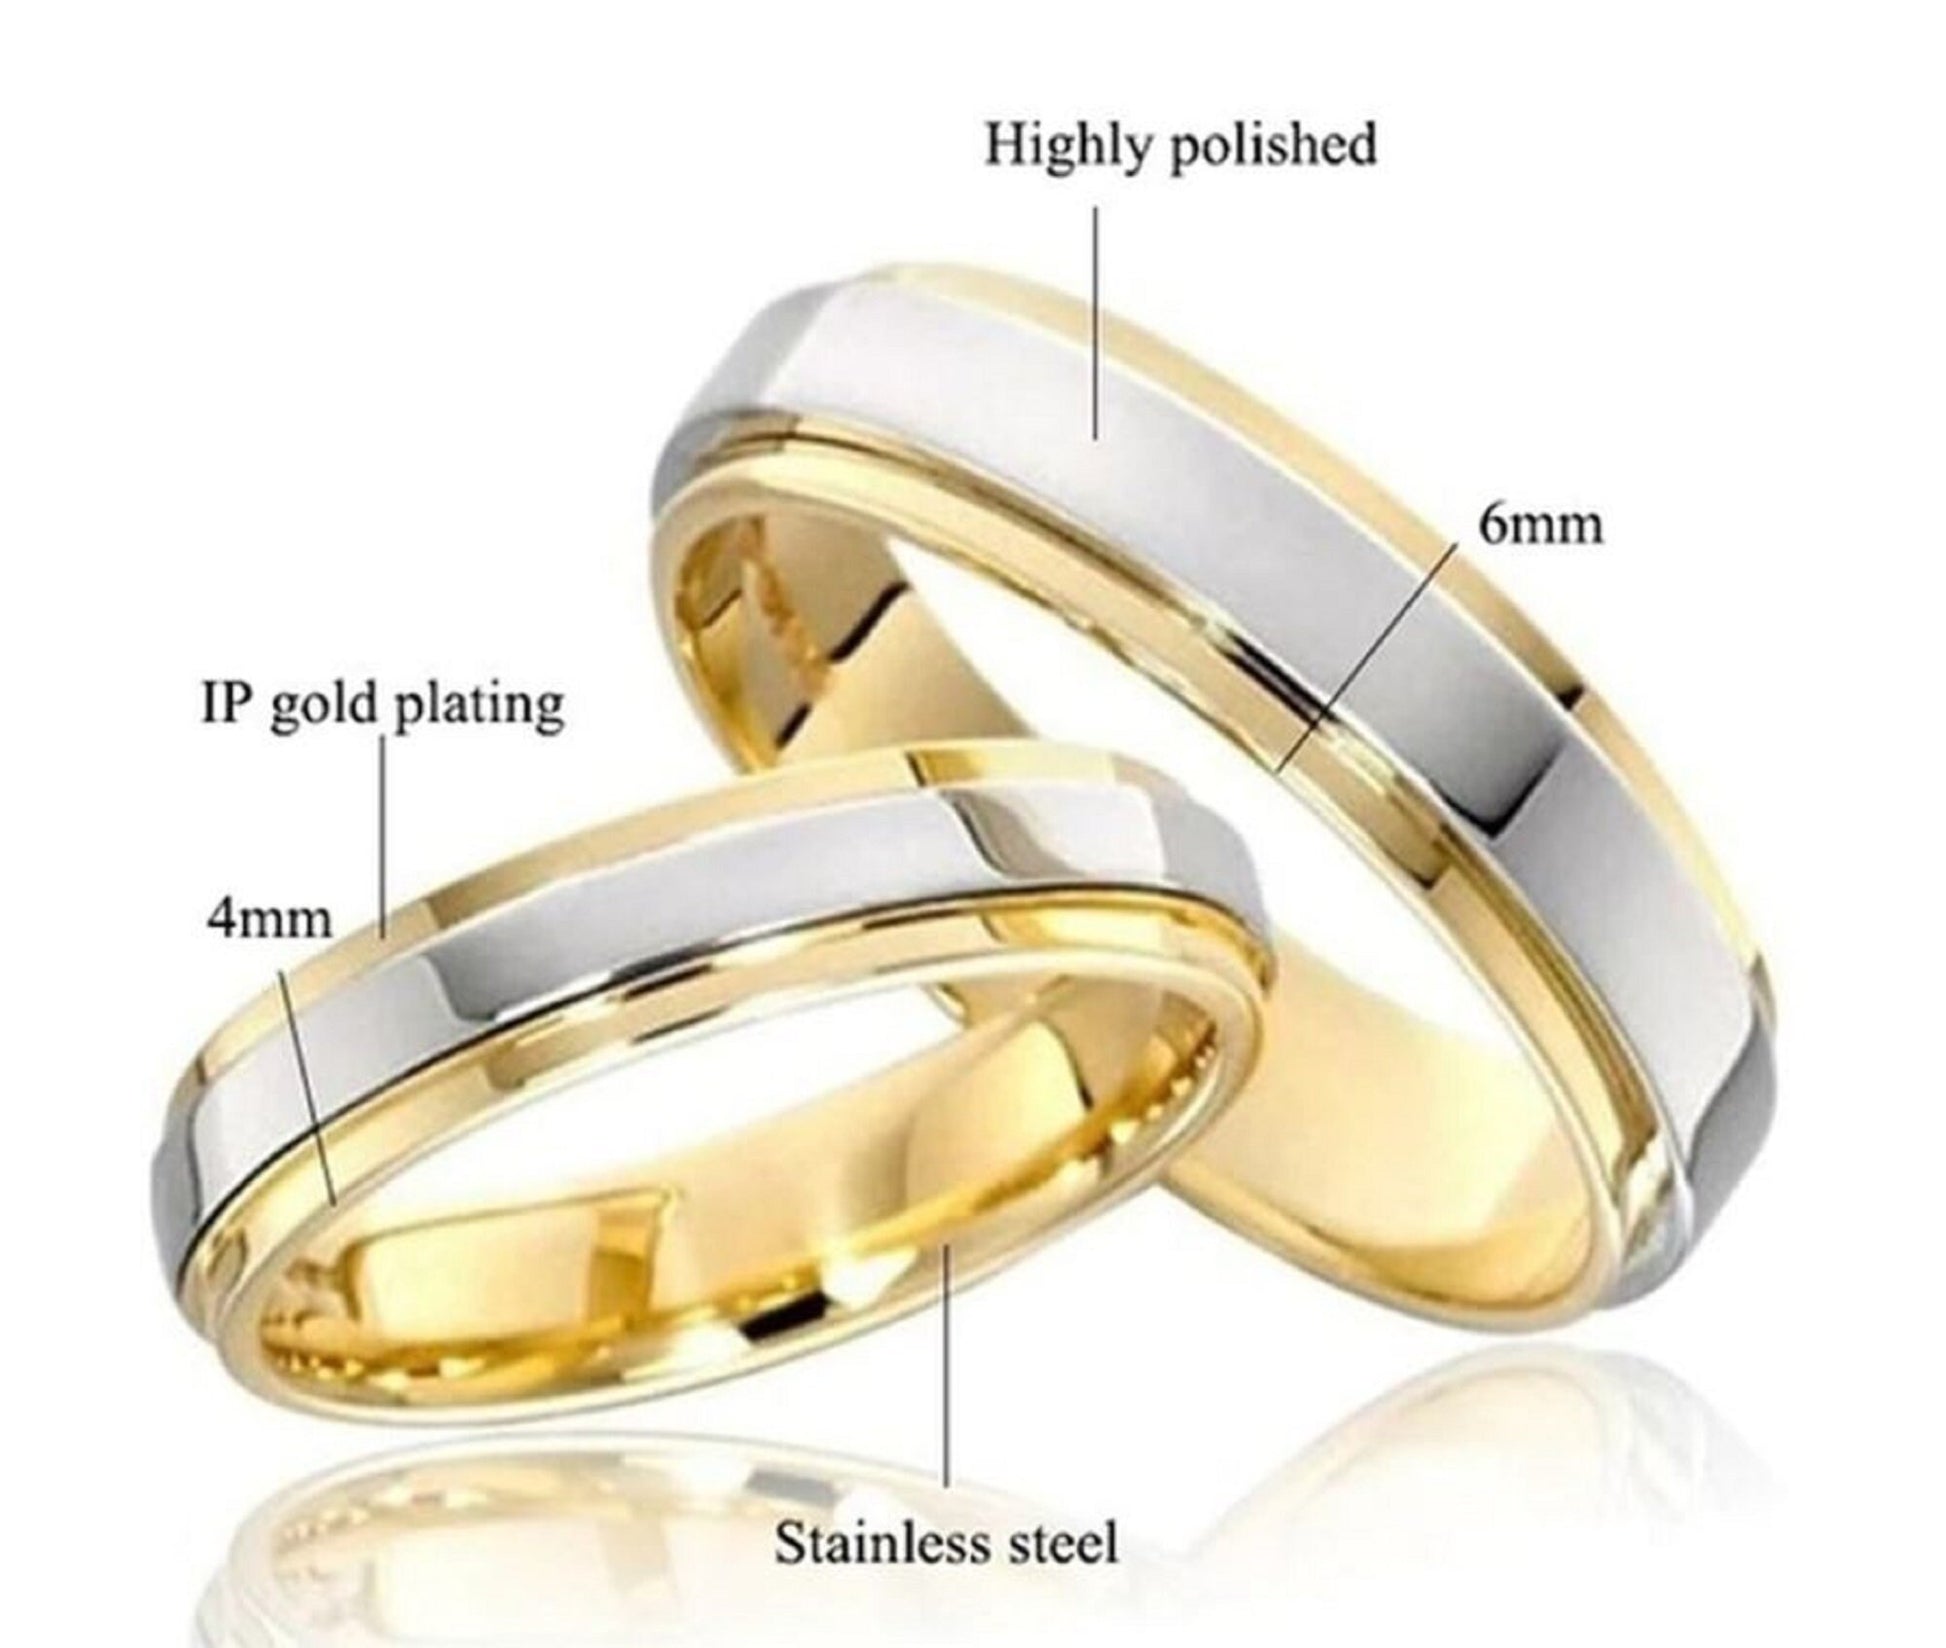 Gold Stainless Steel Couples Ring Set for Him & Her Plated Bands - Friendship, Promise, Engagement, Wedding, Anniversary, Celebration